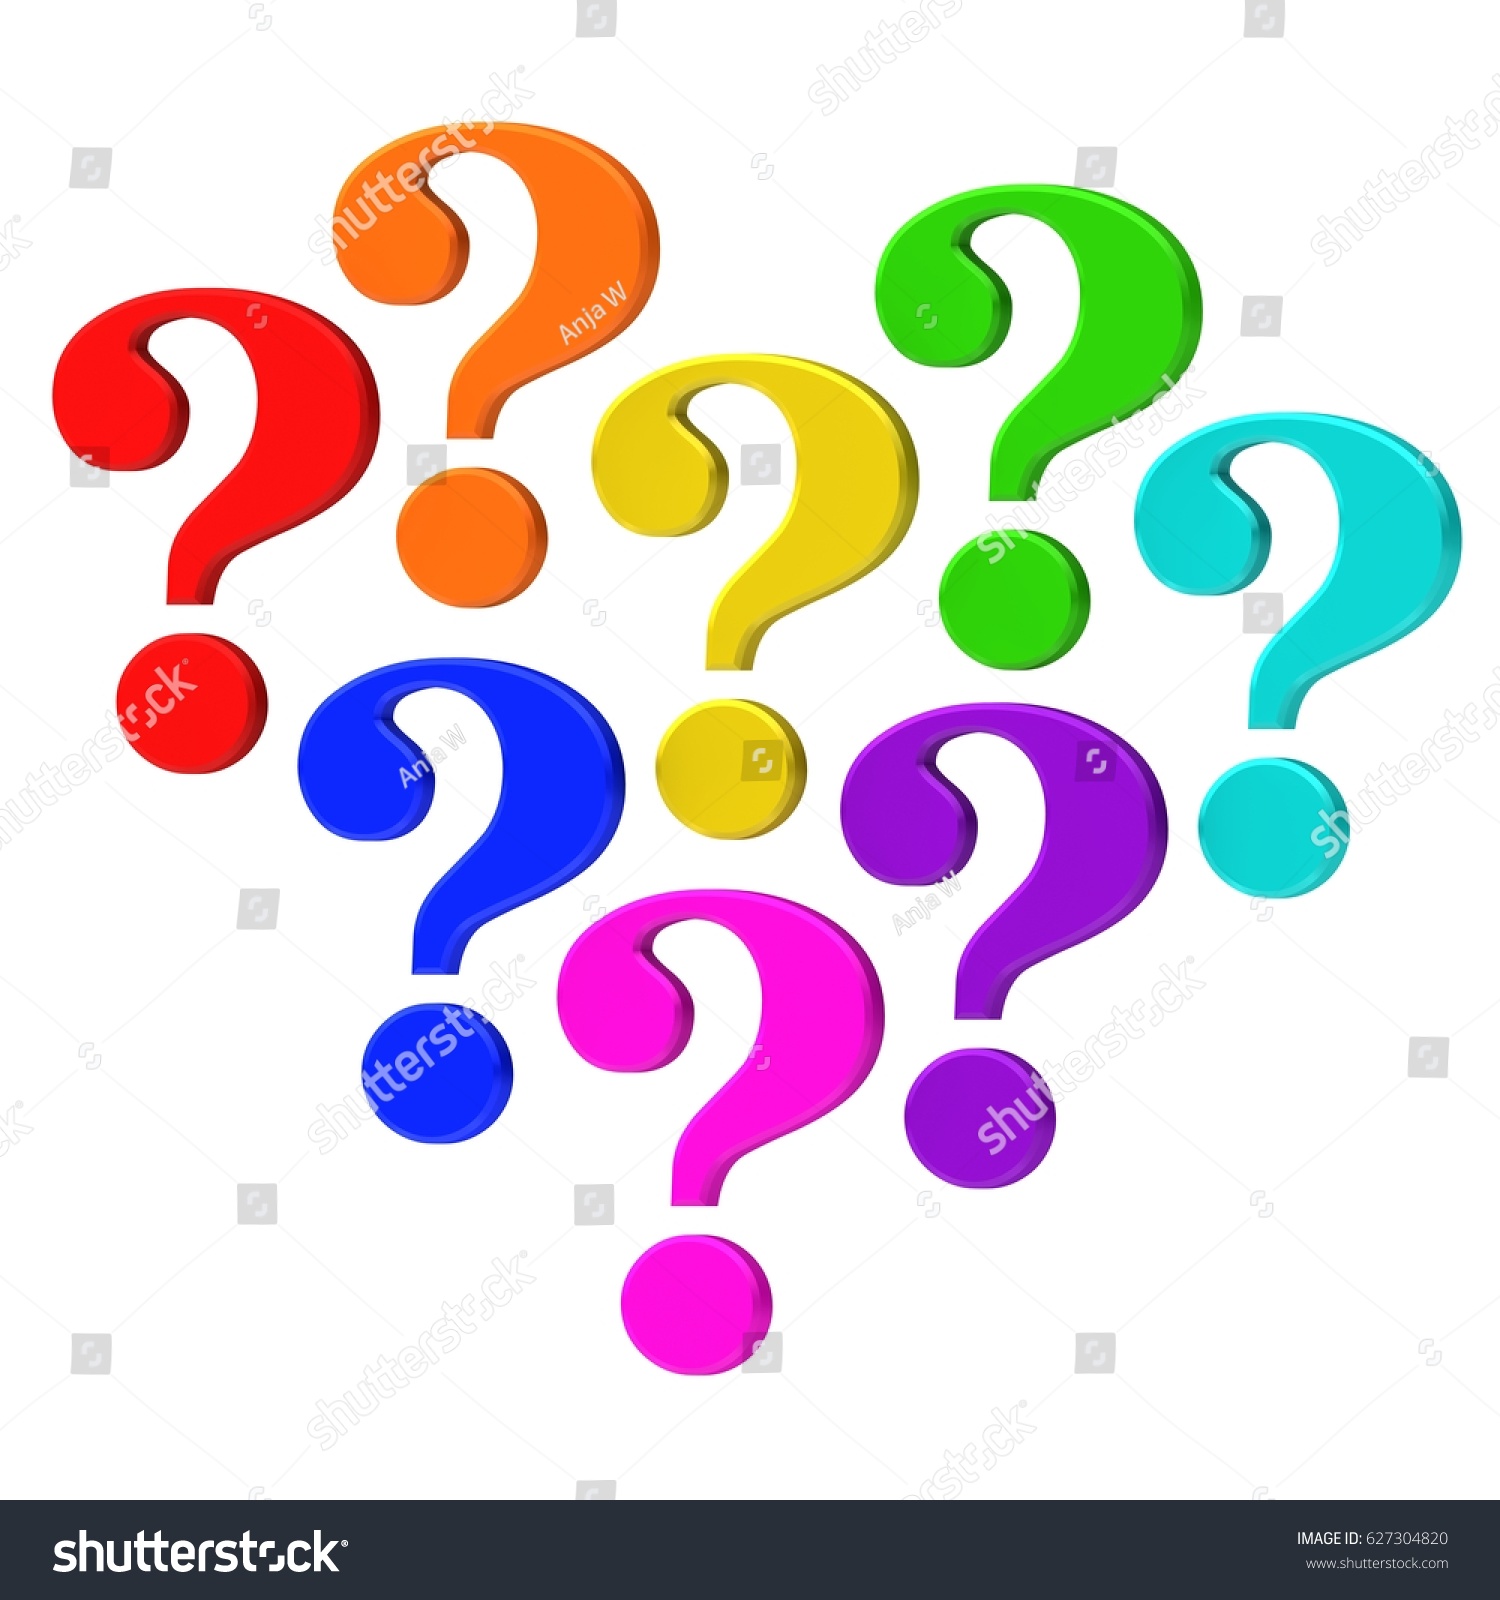 Question Marks 3d Rendering Punctuation Sign Stock Illustration ...